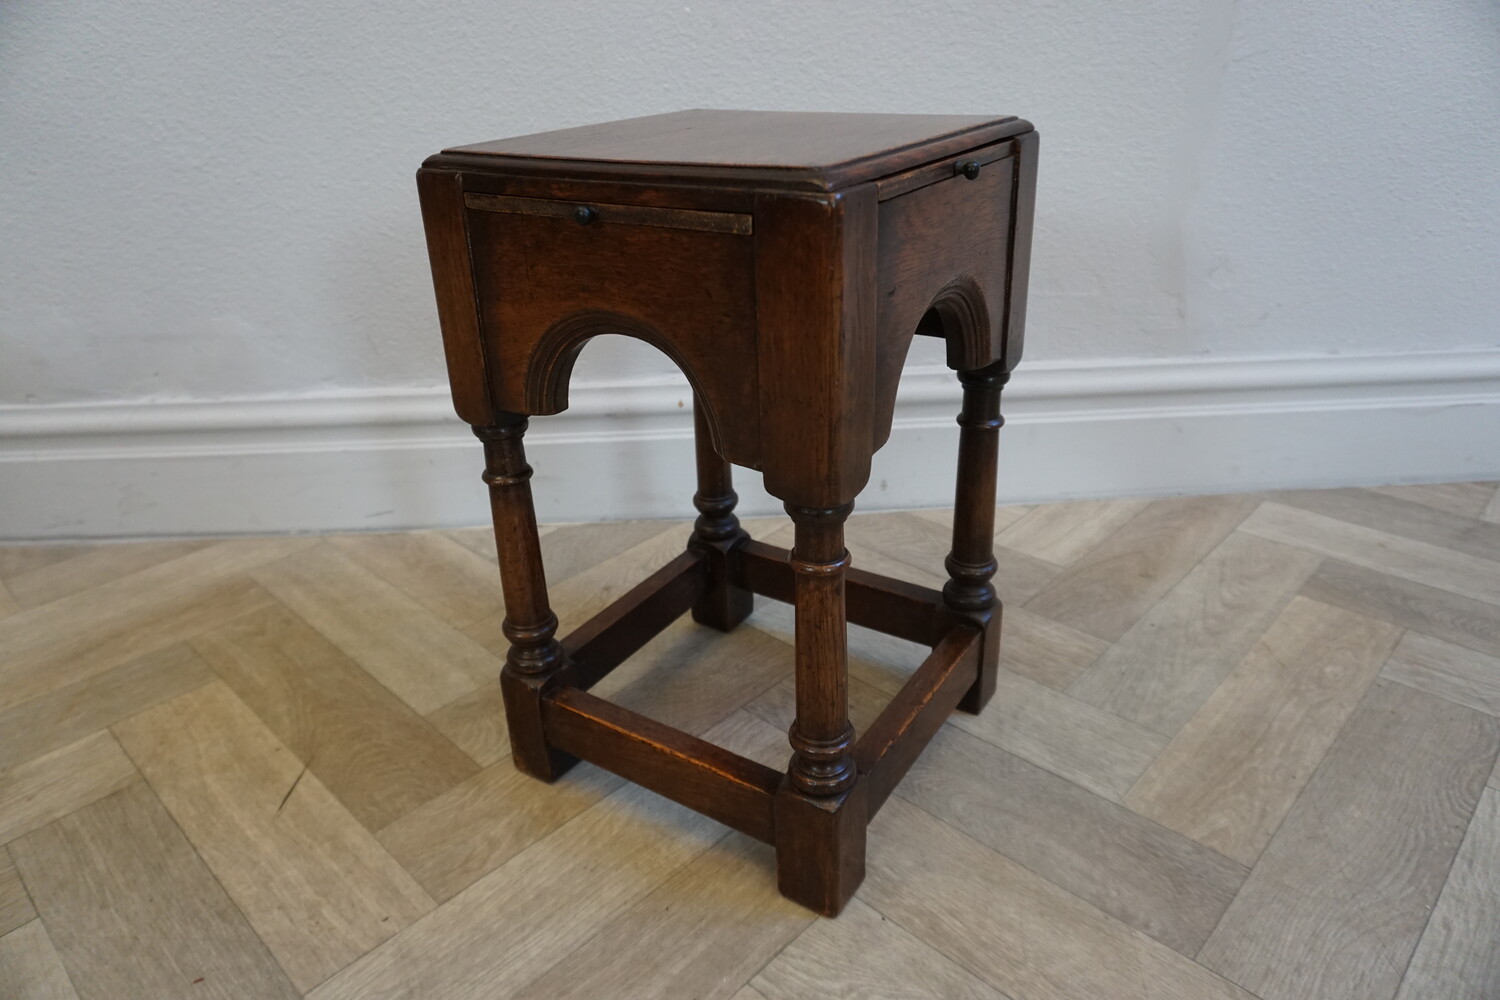 Gothic revival table